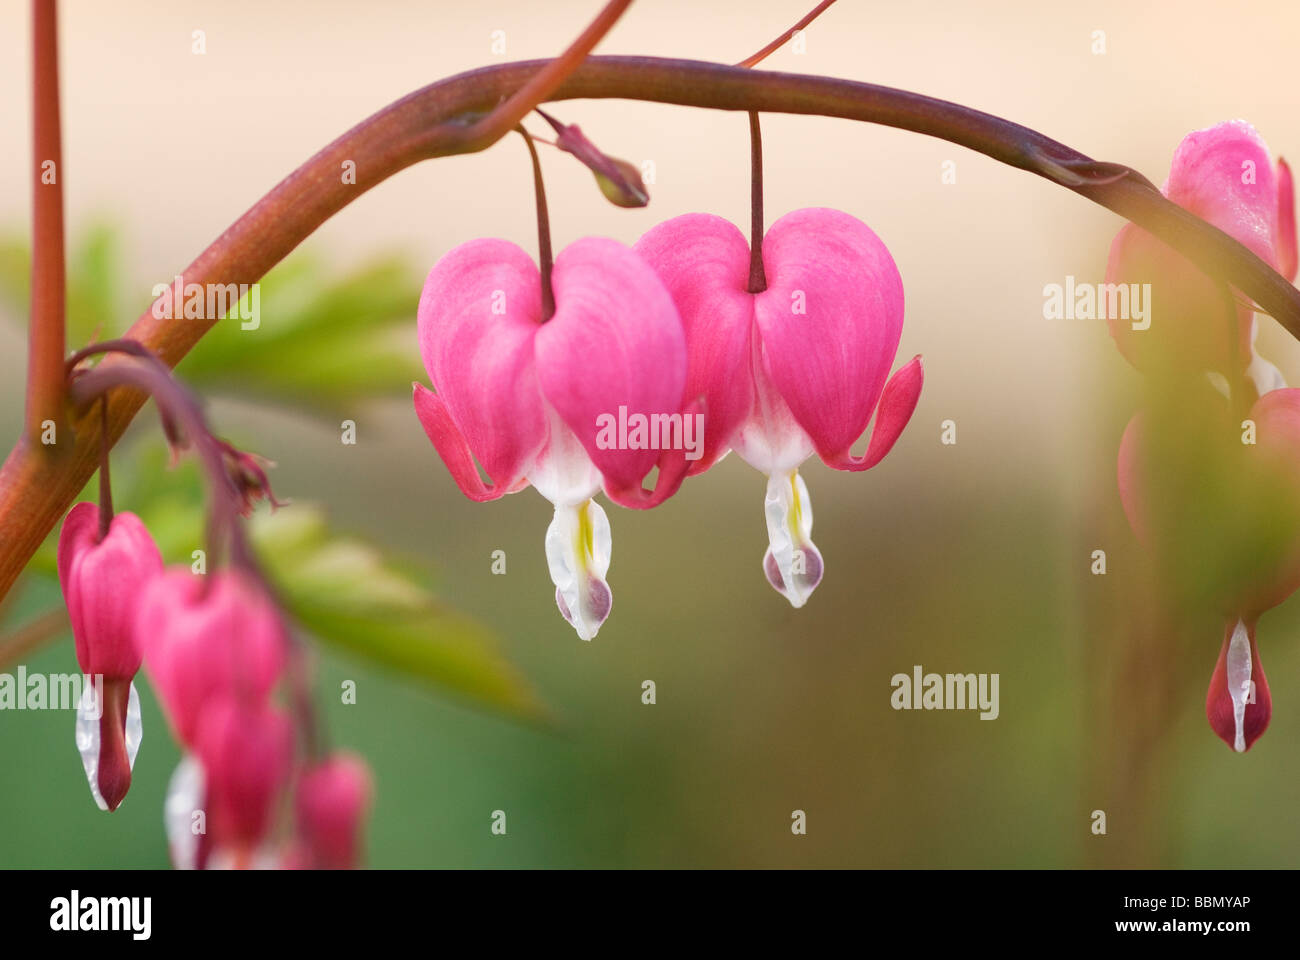 SOFT FOCUS CLOSE-UP OF PINK FLOWERS OF DICENTRA SPECTABILIS BLEEDING HEART Stock Photo